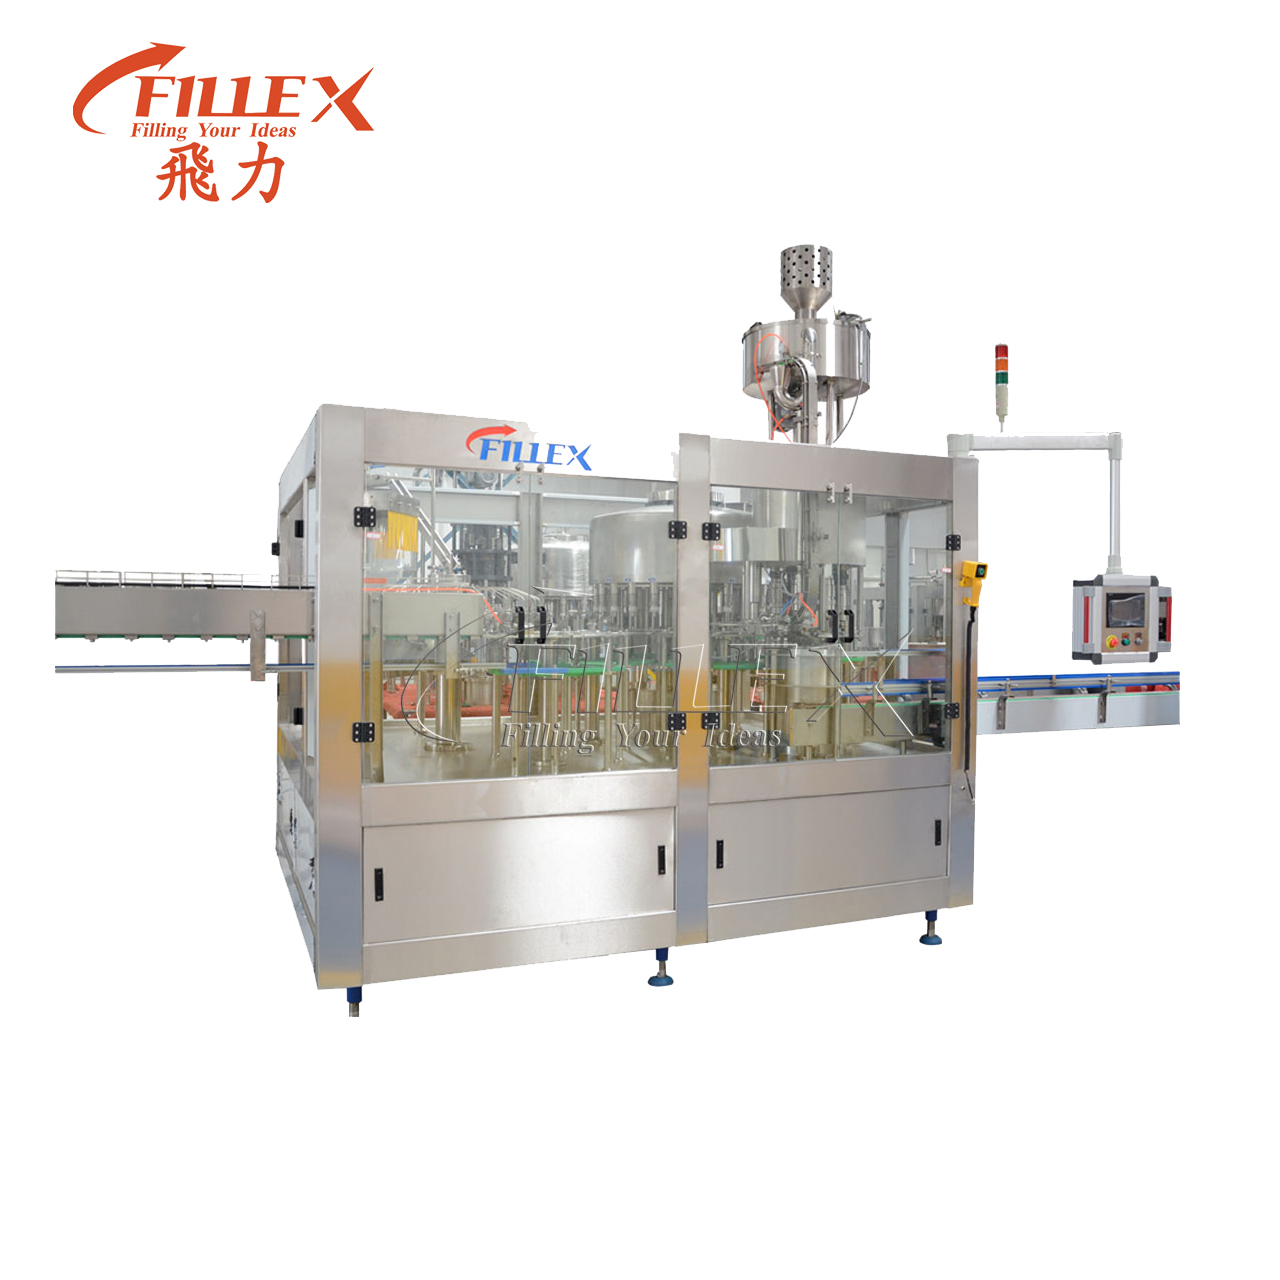 Drink Water soda water Beverage Production Filling Line Equipment